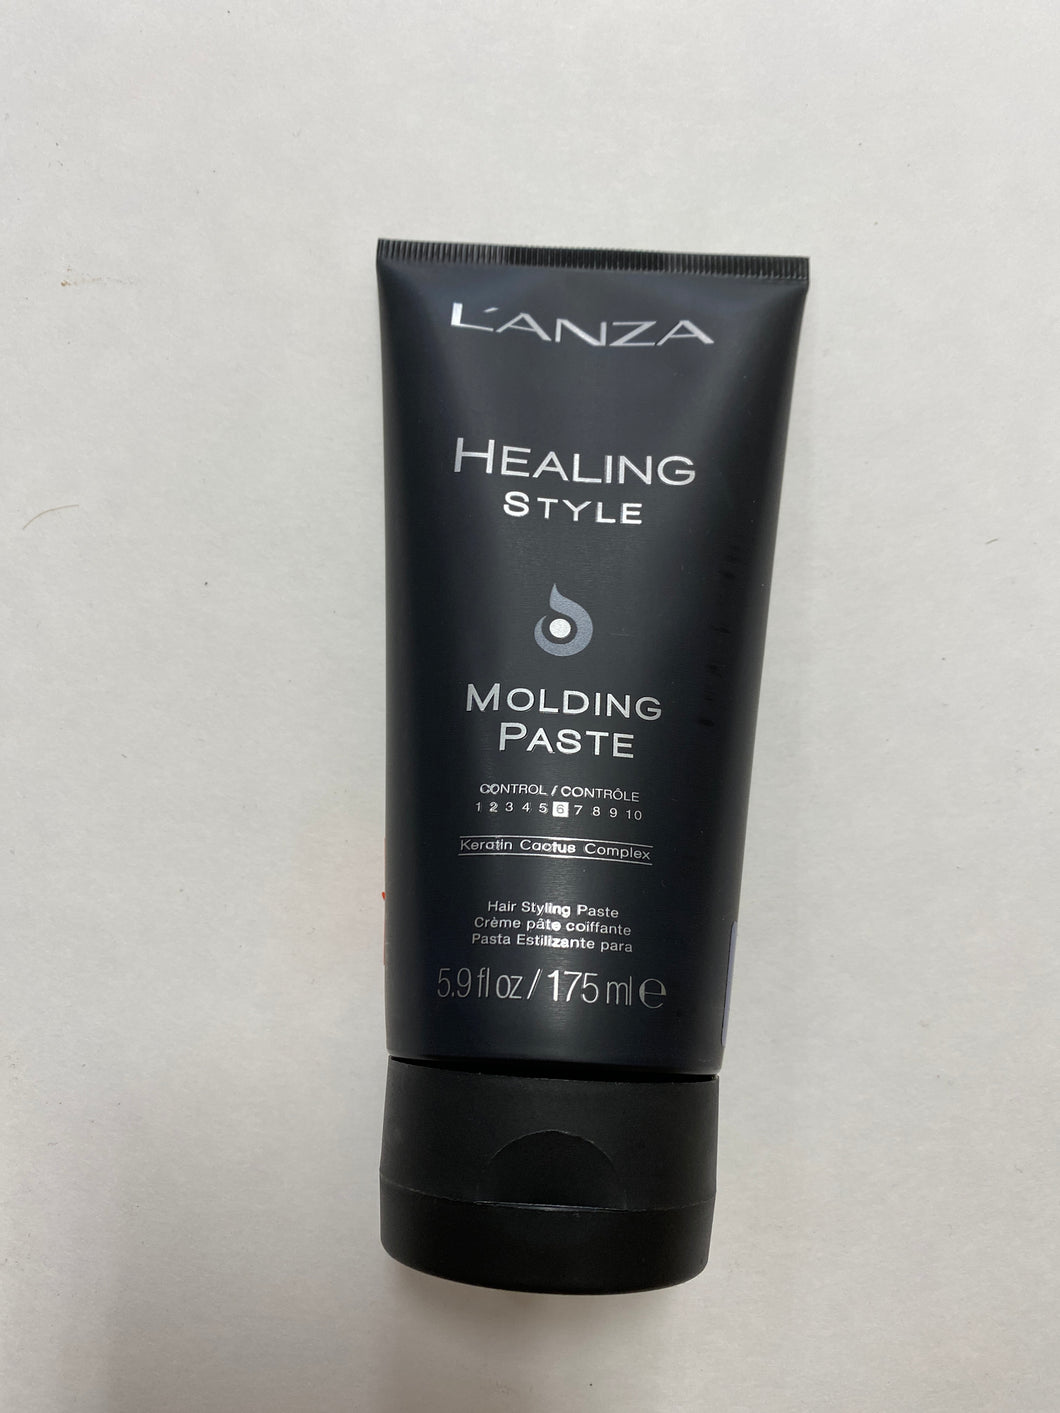 L’anza Healing Style Molding Paste